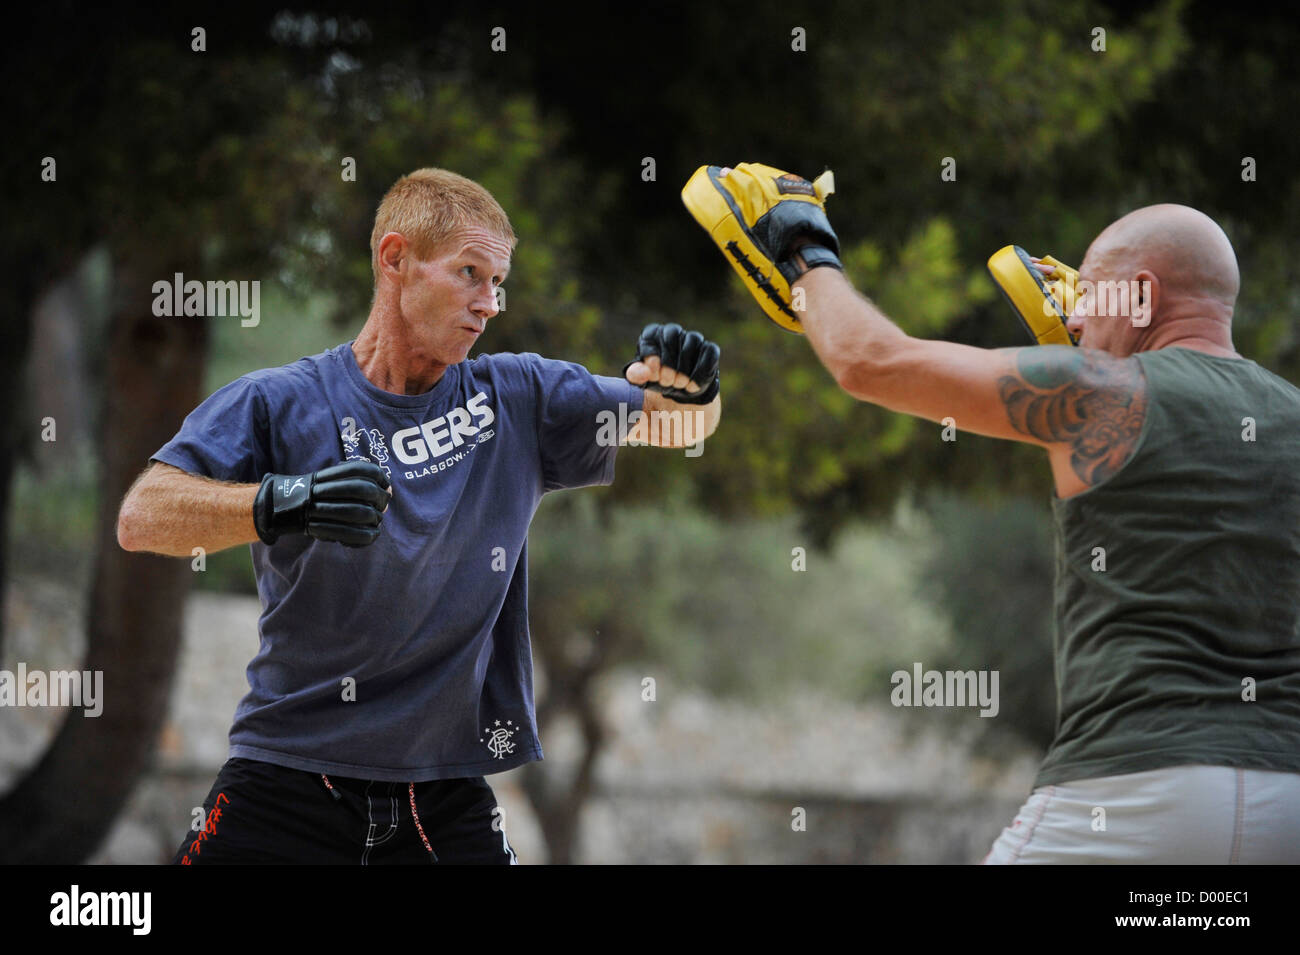 two men in their forties practice martial arts outdoors in a park Stock Photo